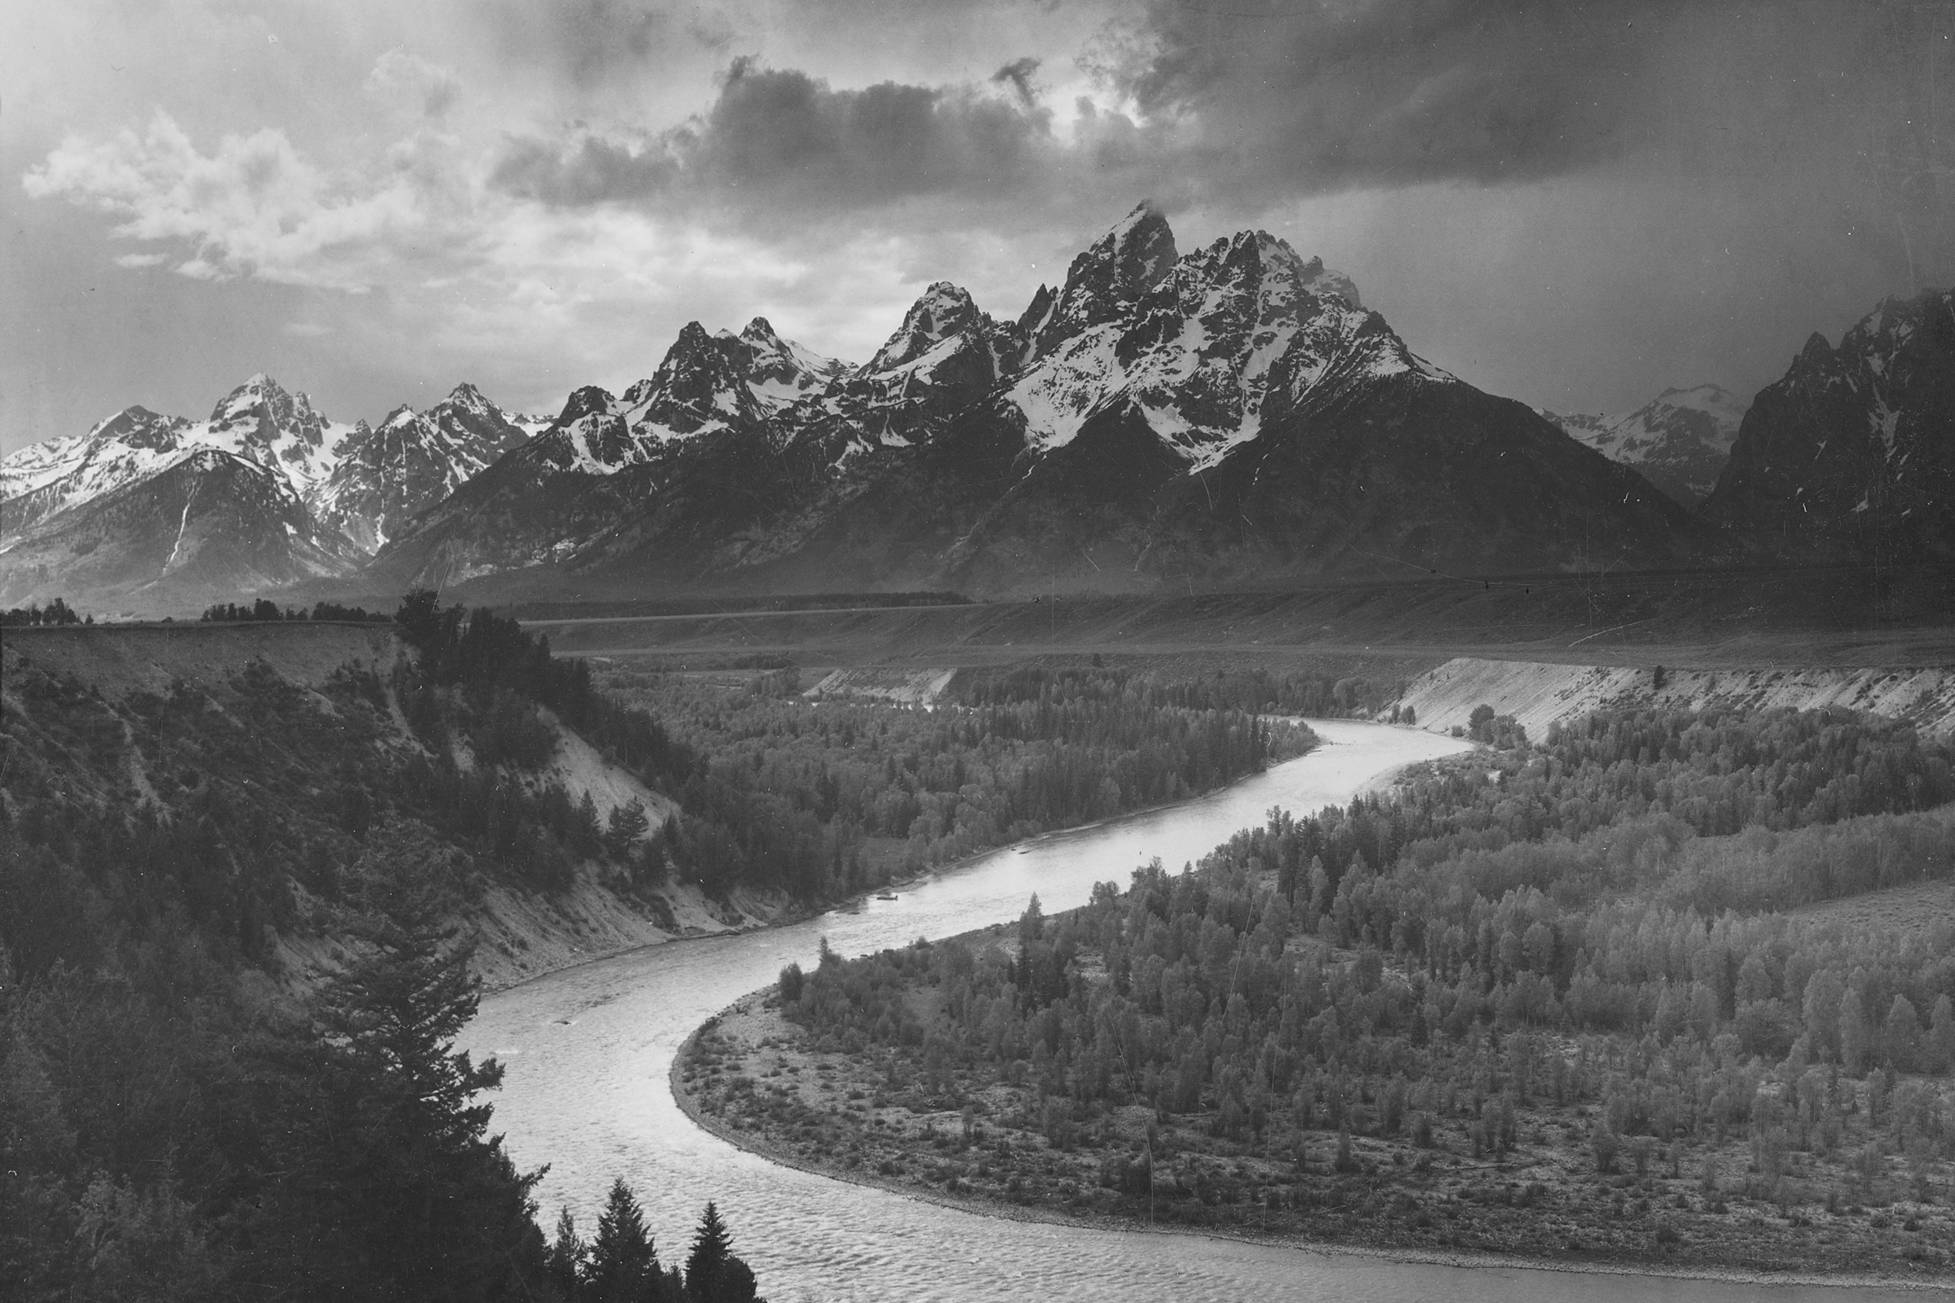 Ansel Adams' panorama of Grand Teton National Park with the peak in the background and a meandering river in the forest.